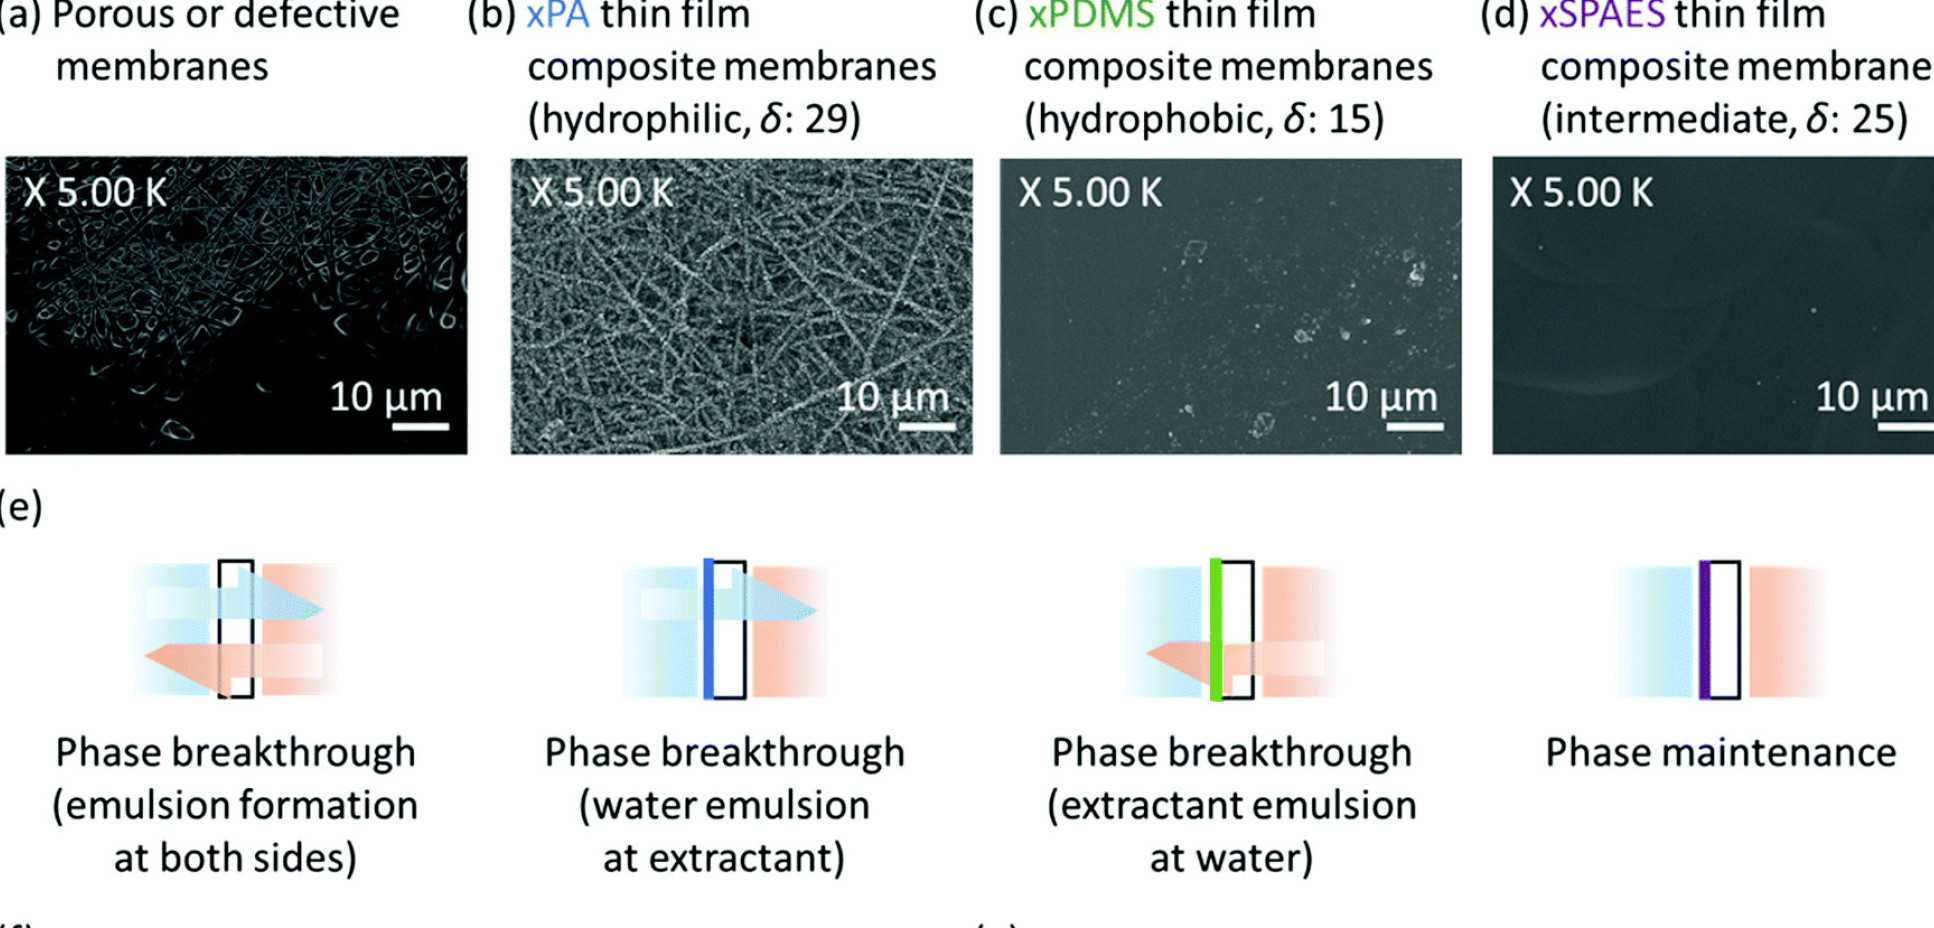 Image showing the different types of biofuel membrane